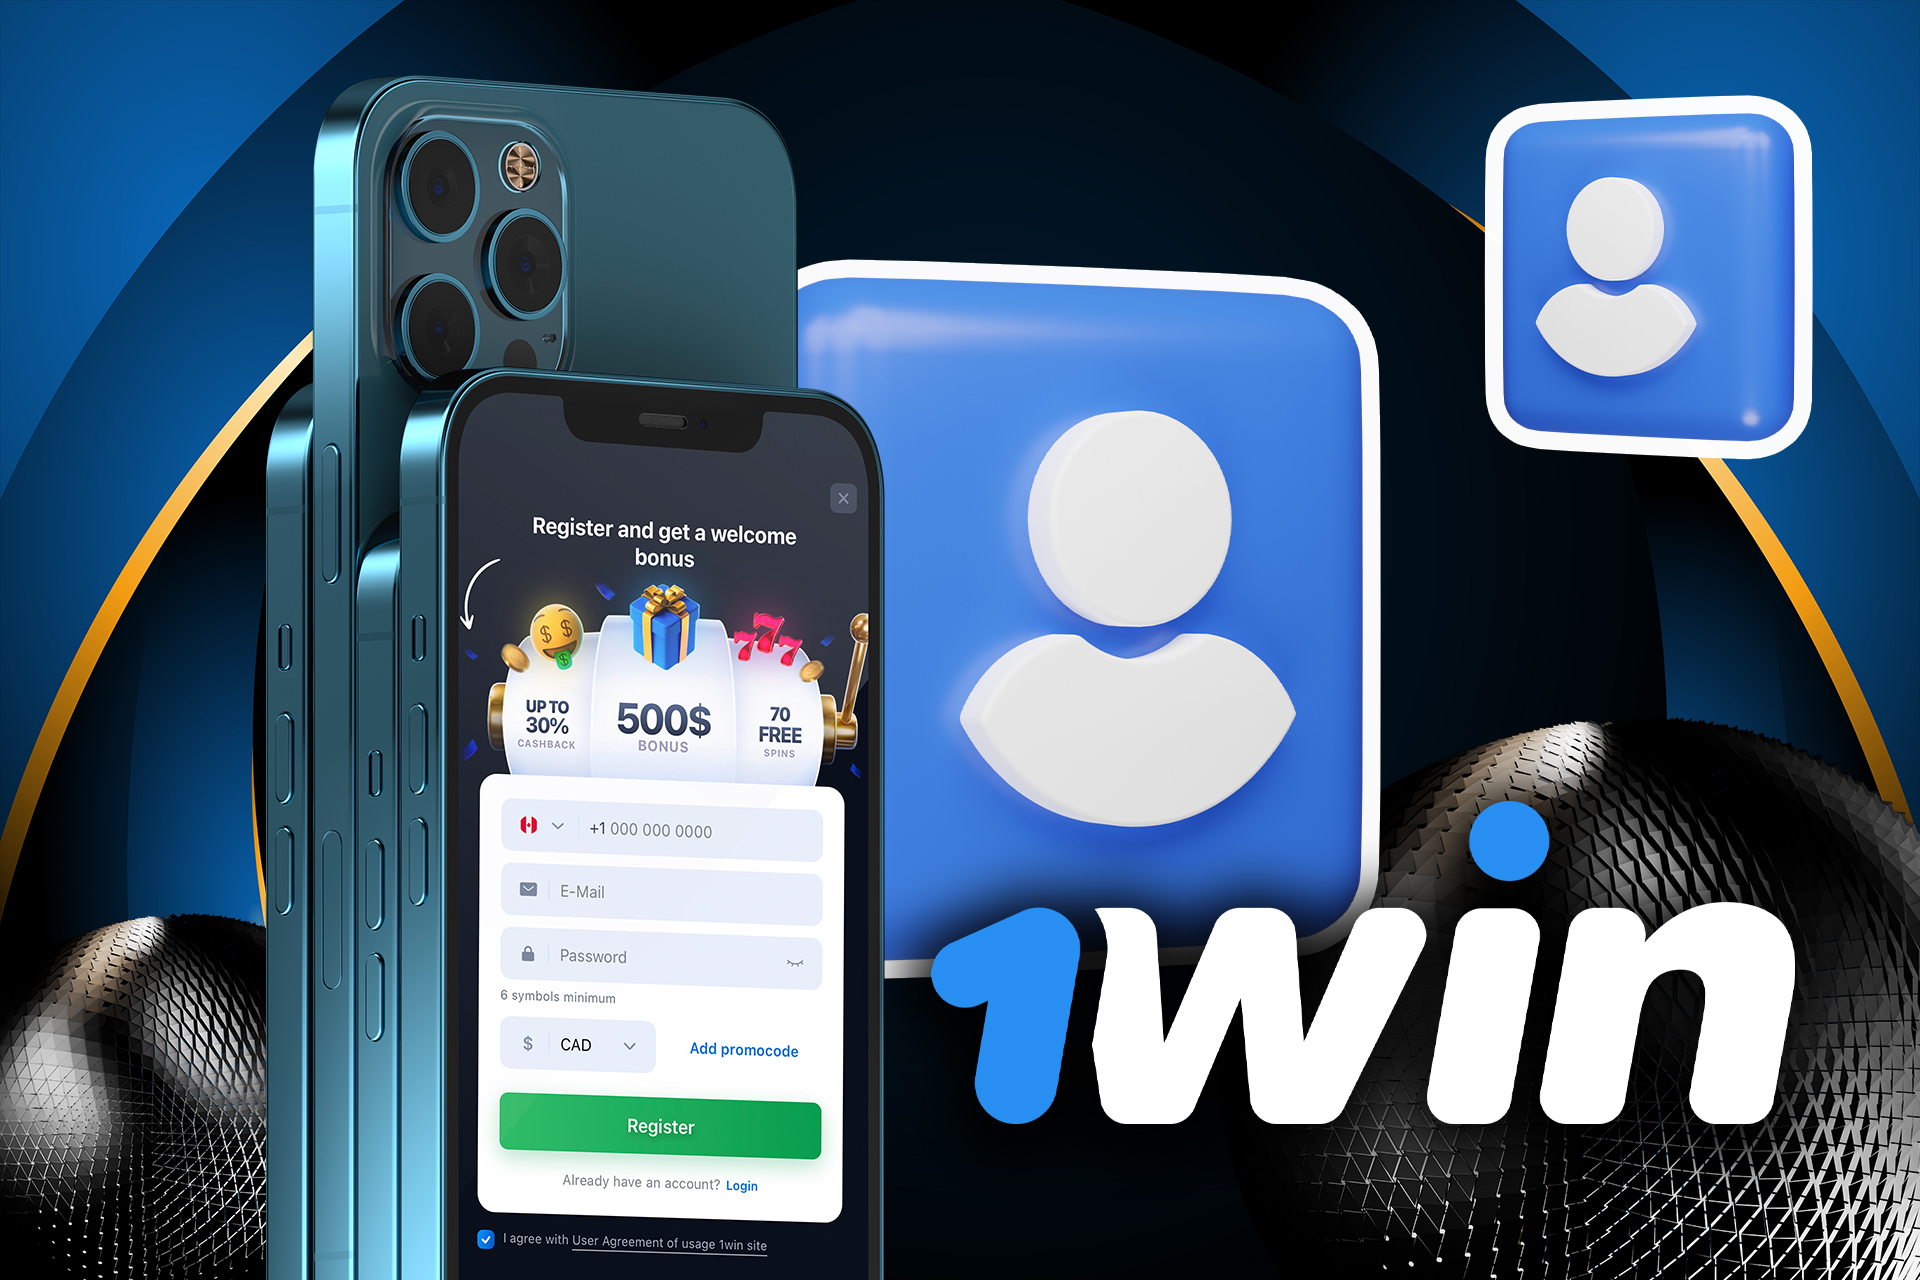 Download the 1win app and register your accoun right on your smartphone.